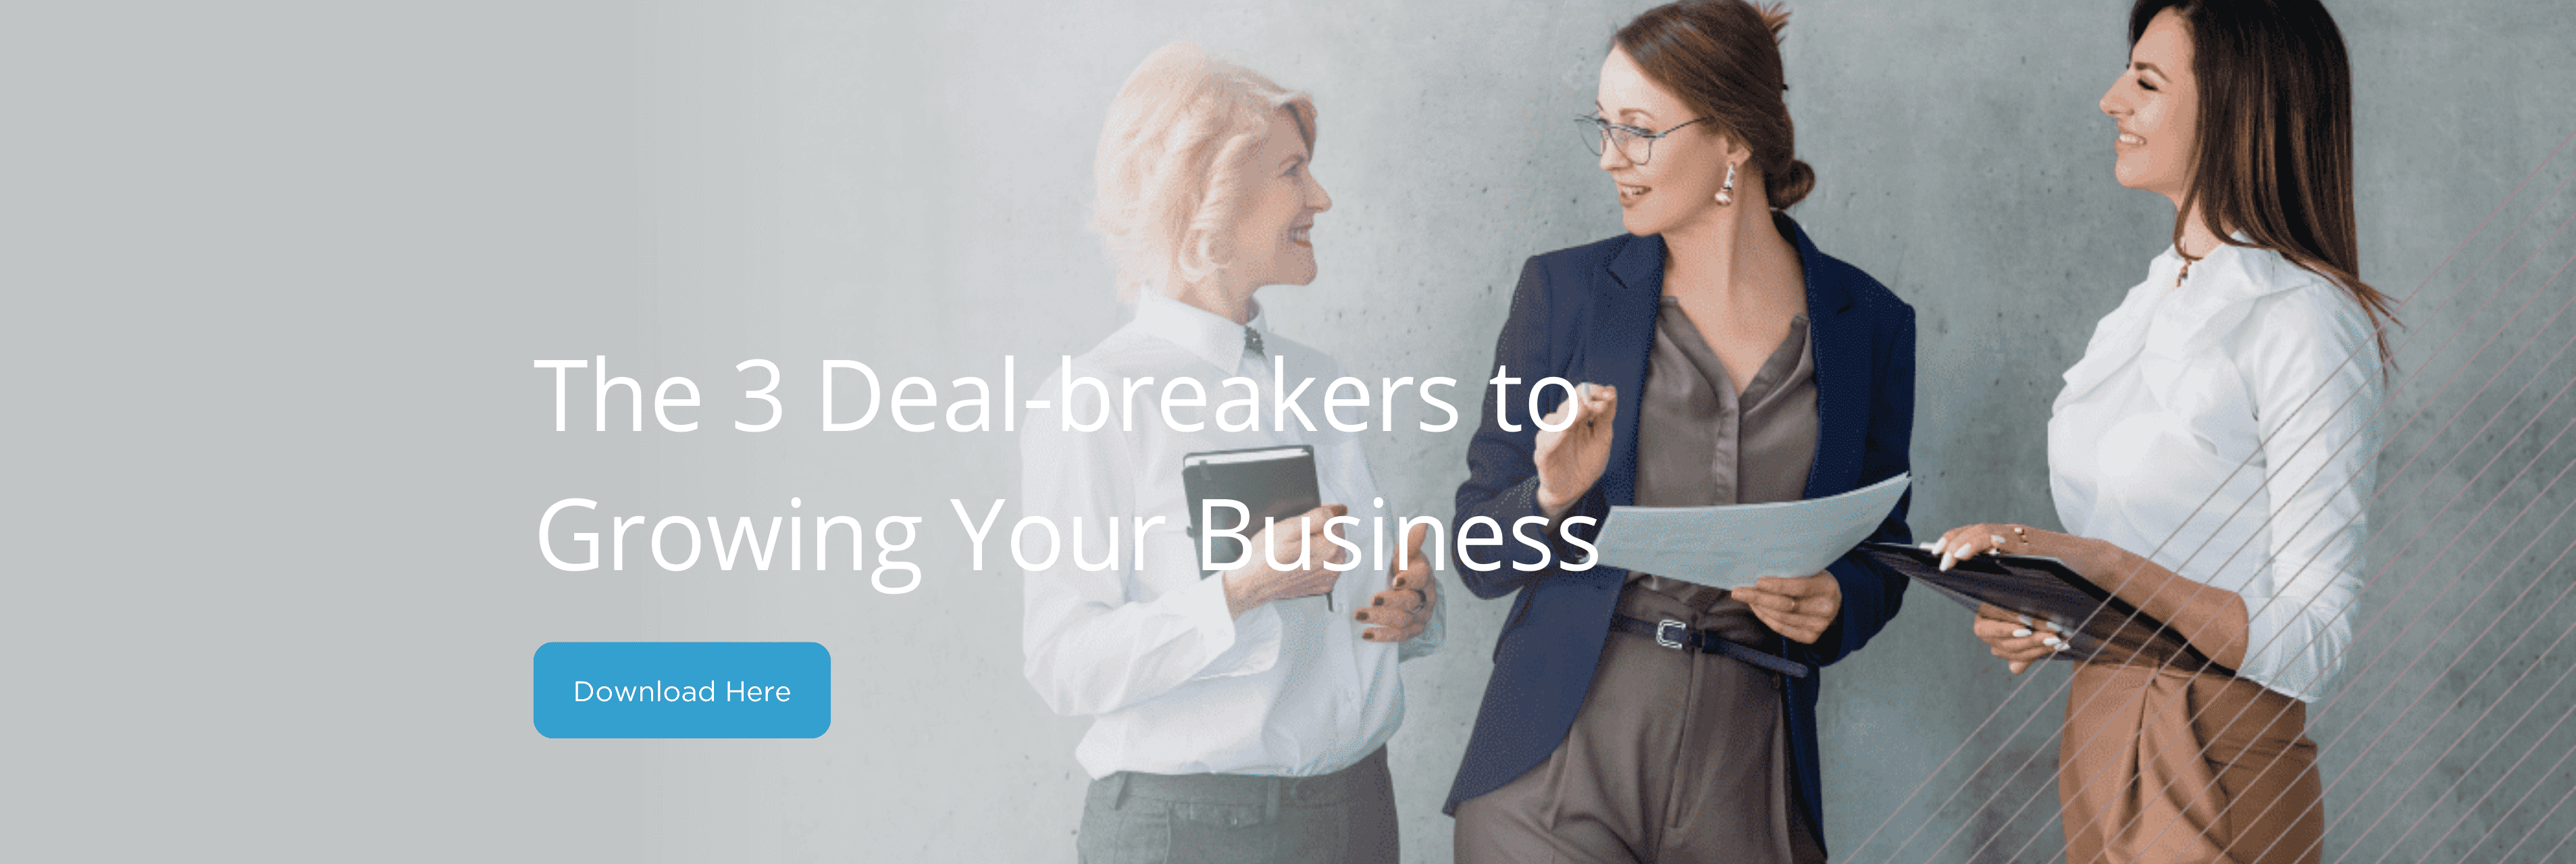 3 Deal-Breakers to Growing Your Business | Energise Marketing